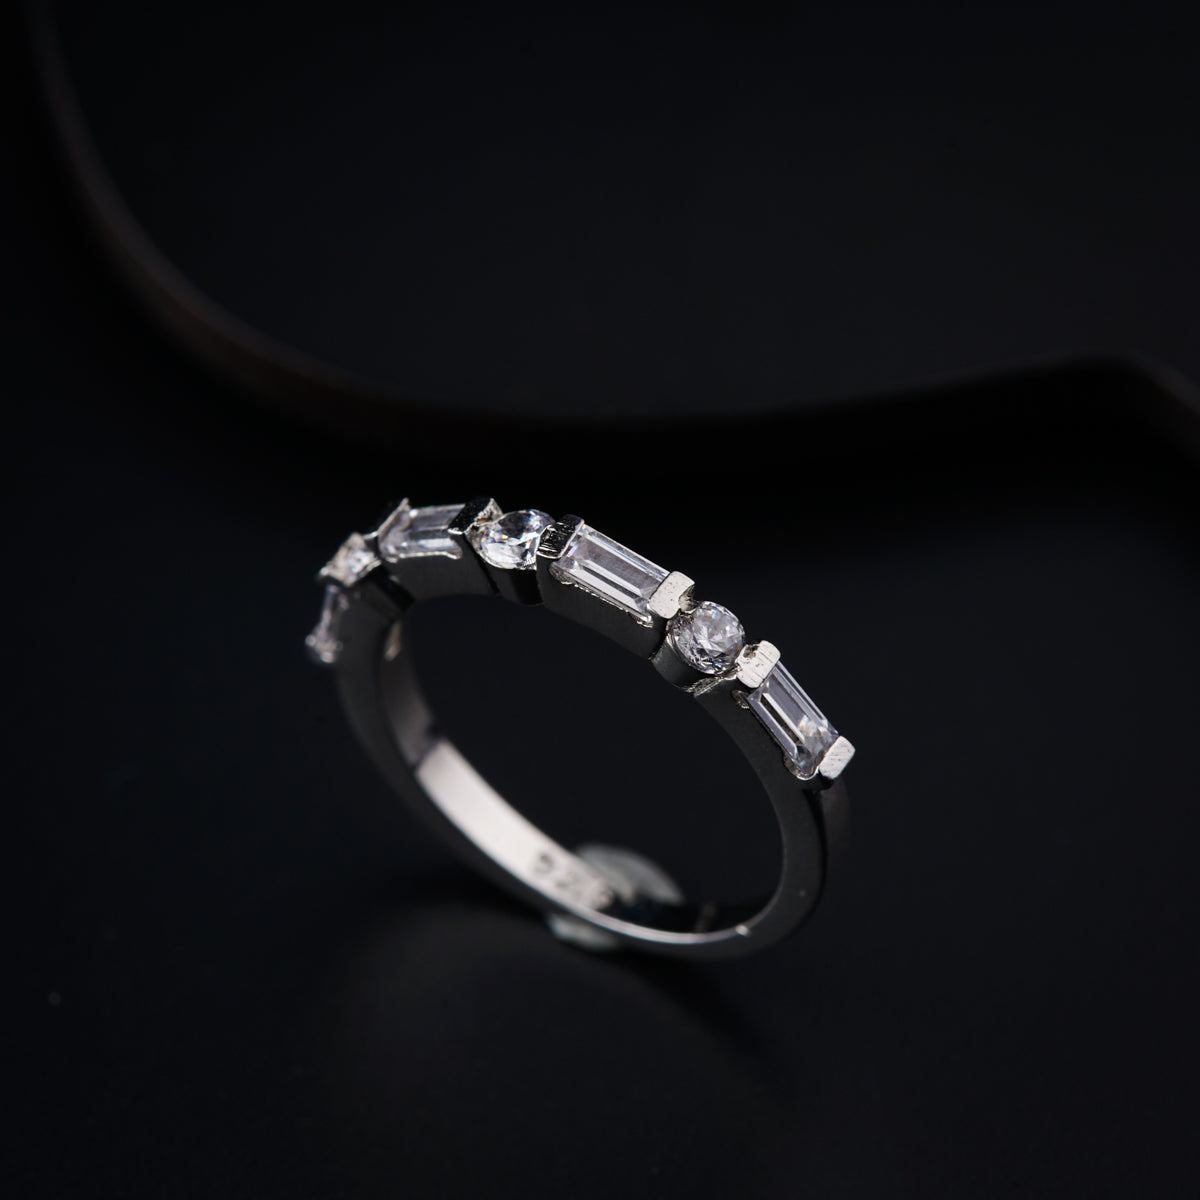 a diamond ring on a black surface